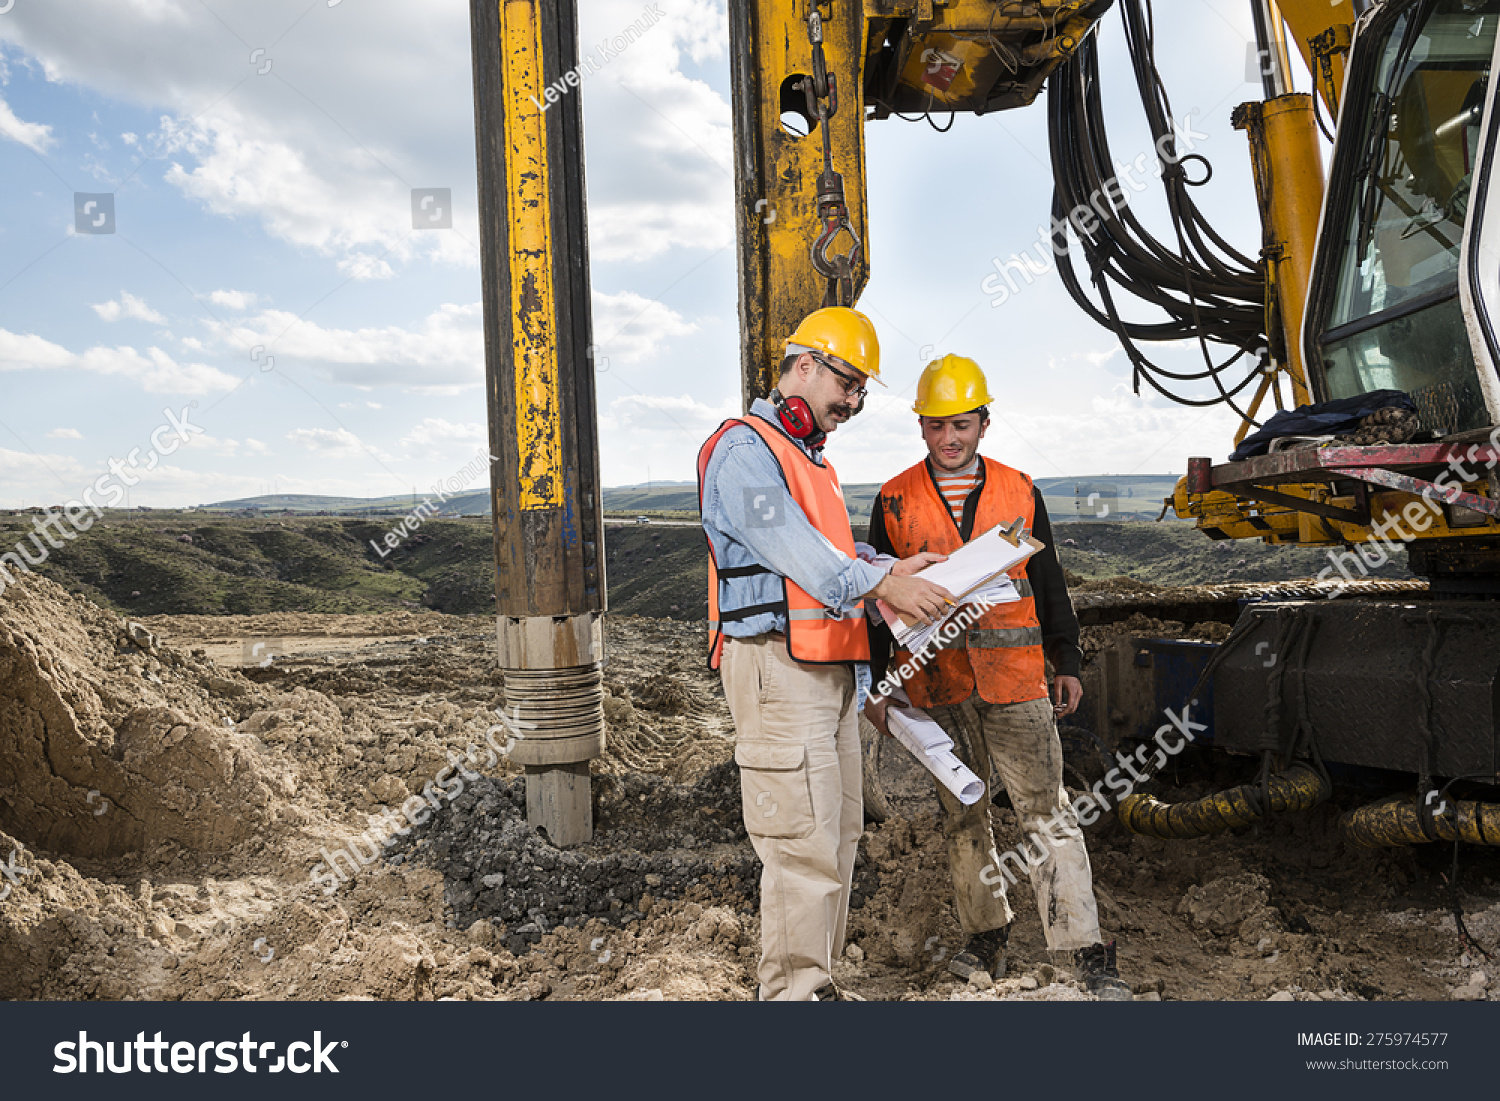 Excavation techniques of drilling